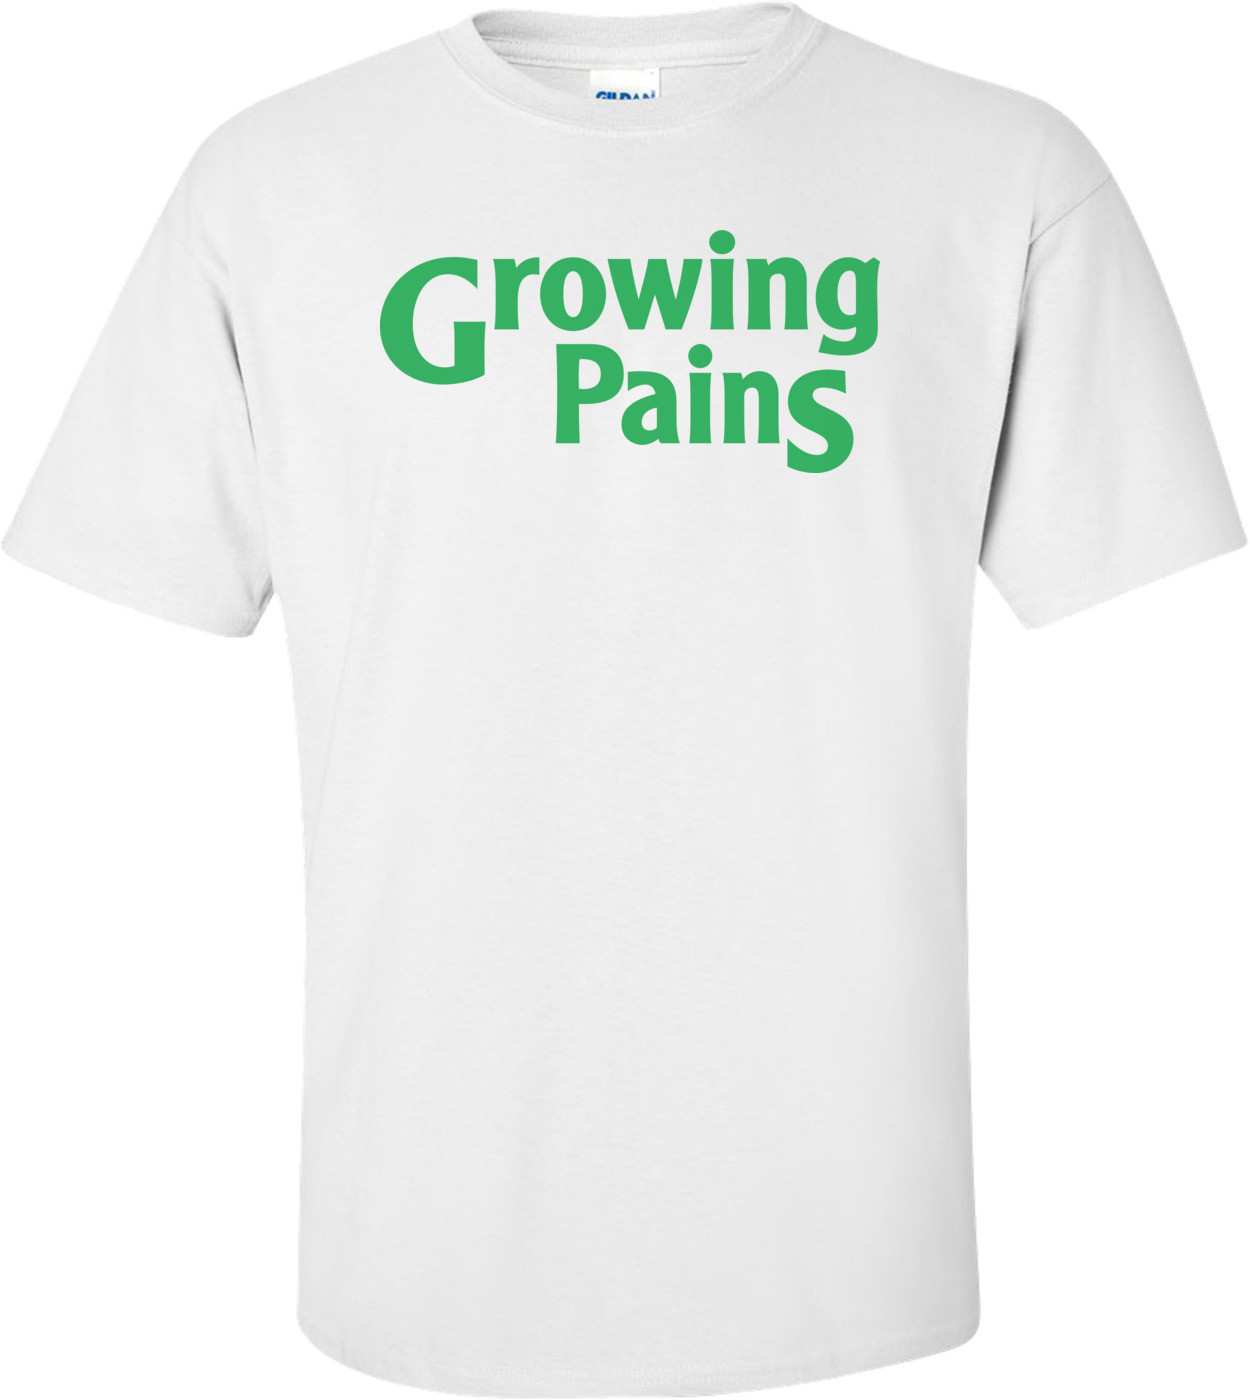 Growing Pains T-shirt